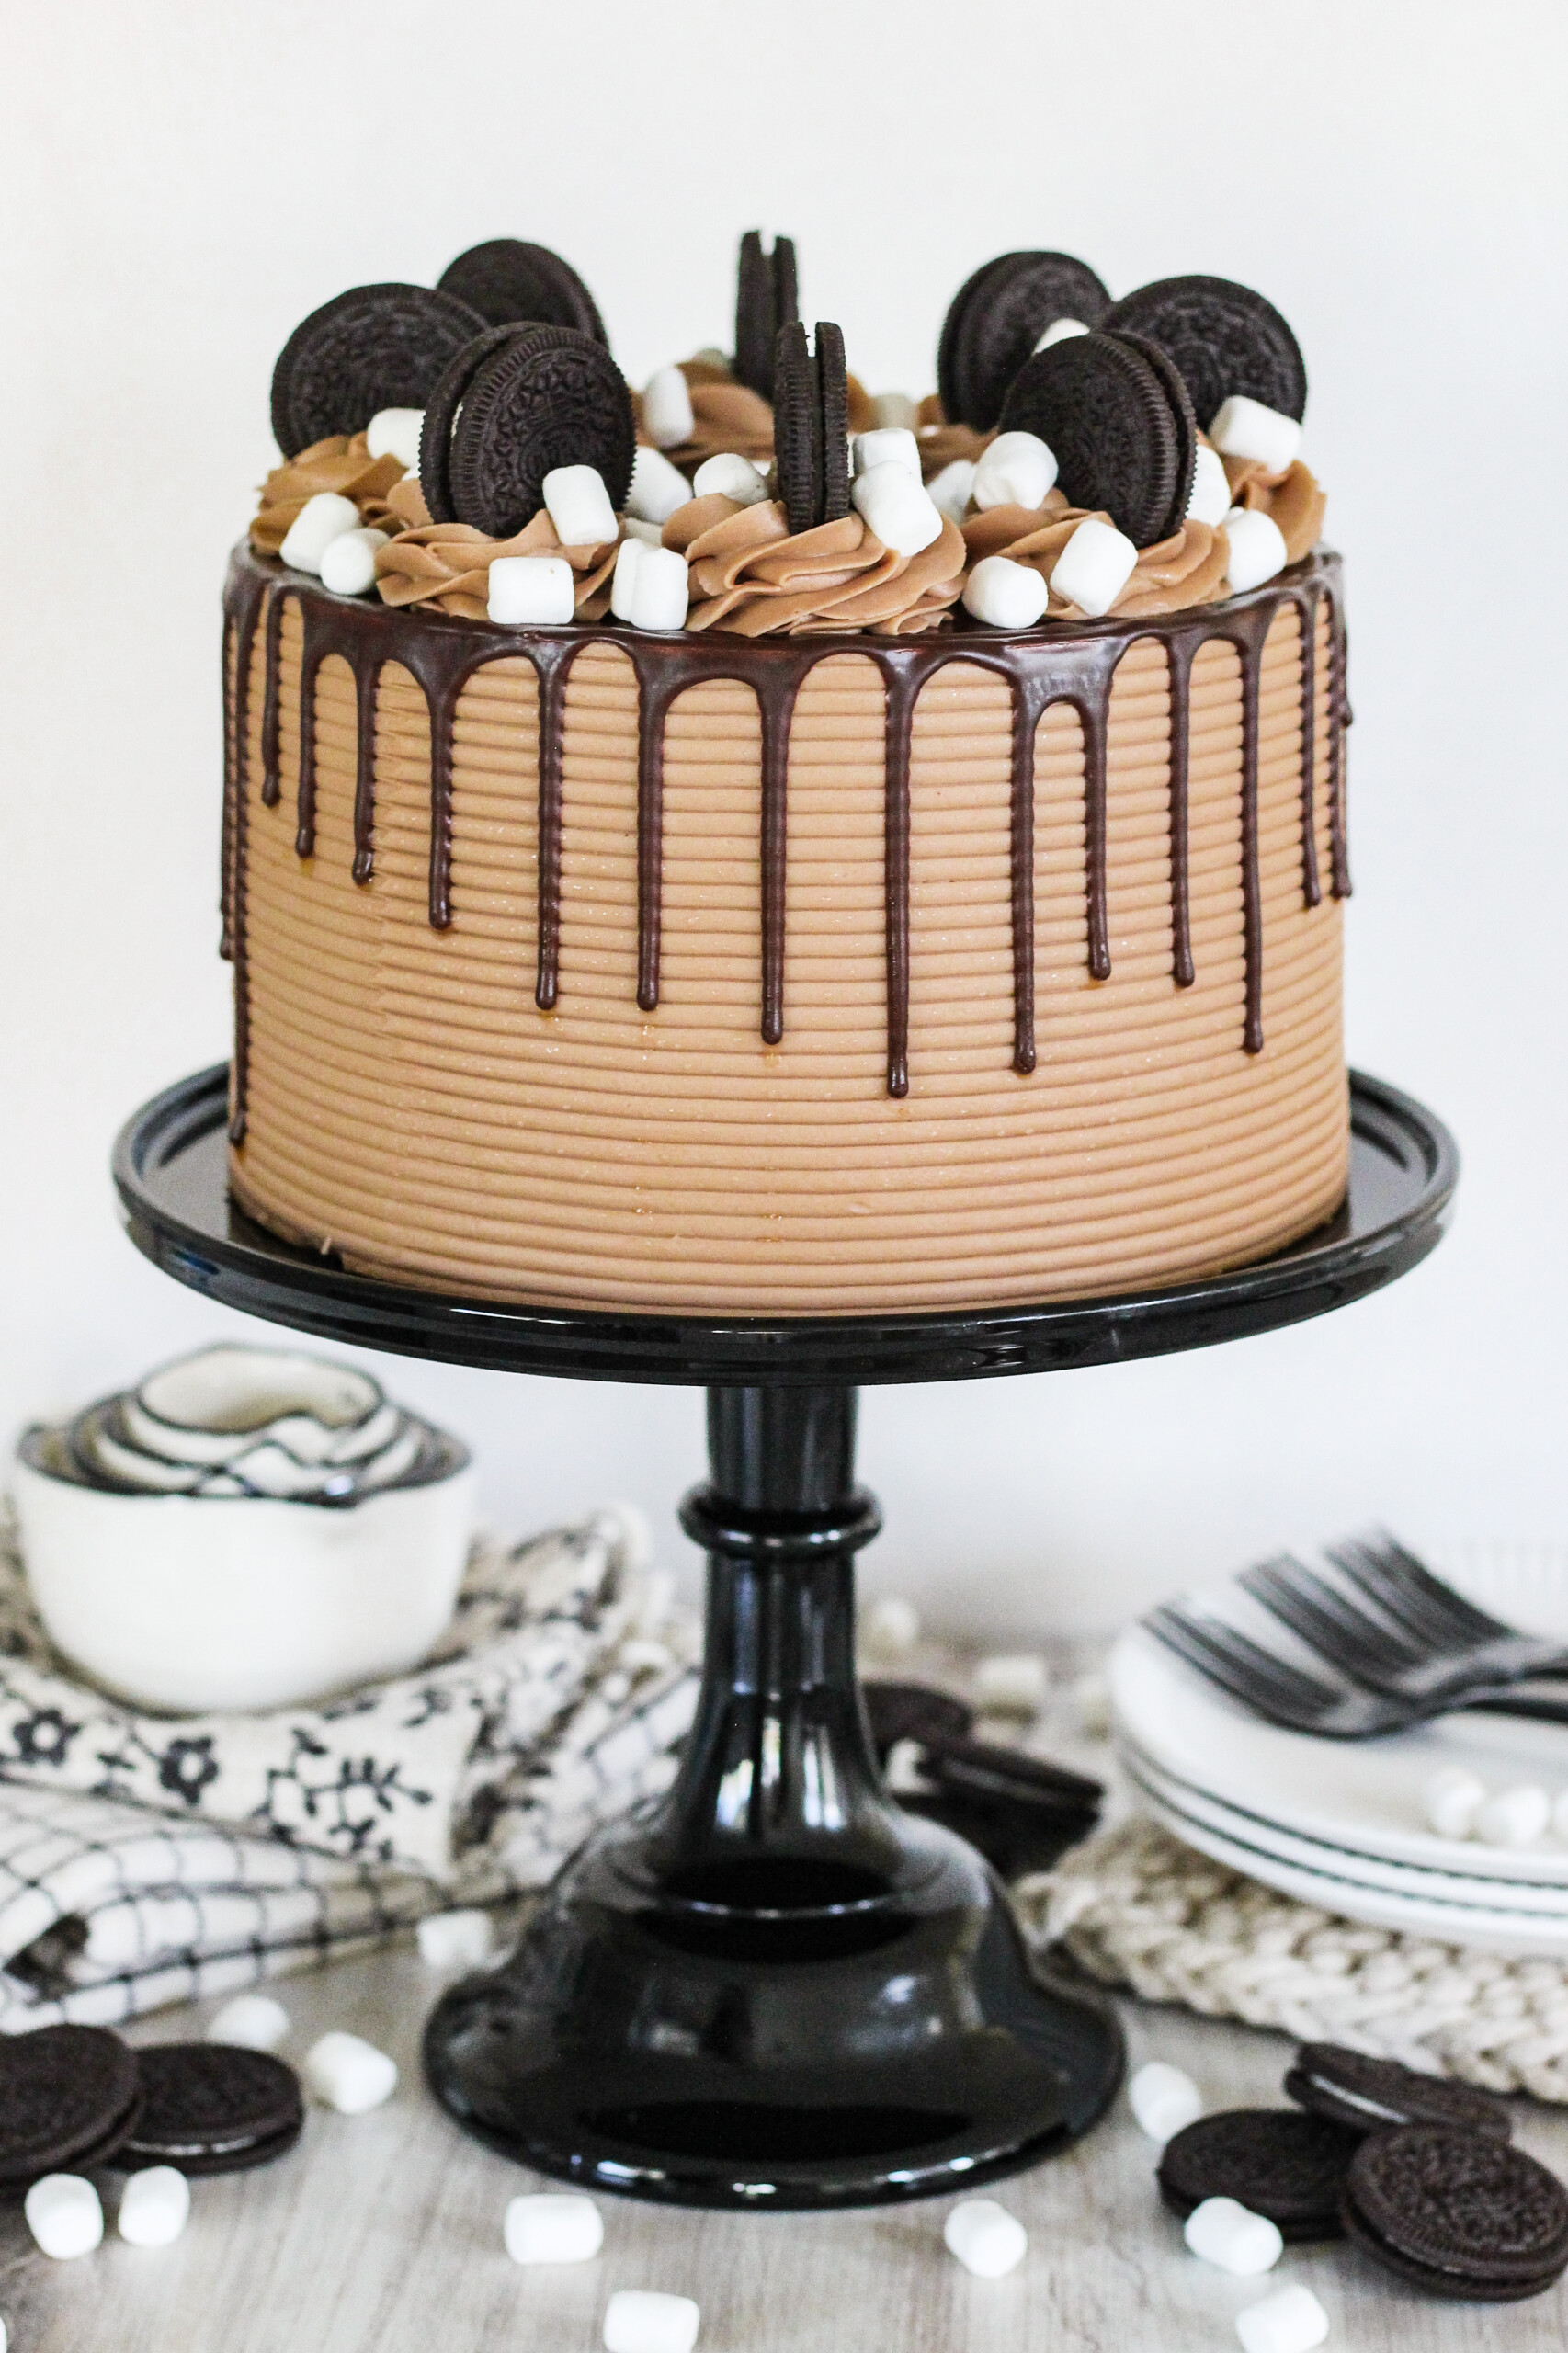 Chocolate cake with Oreos on top on a black cake stand.